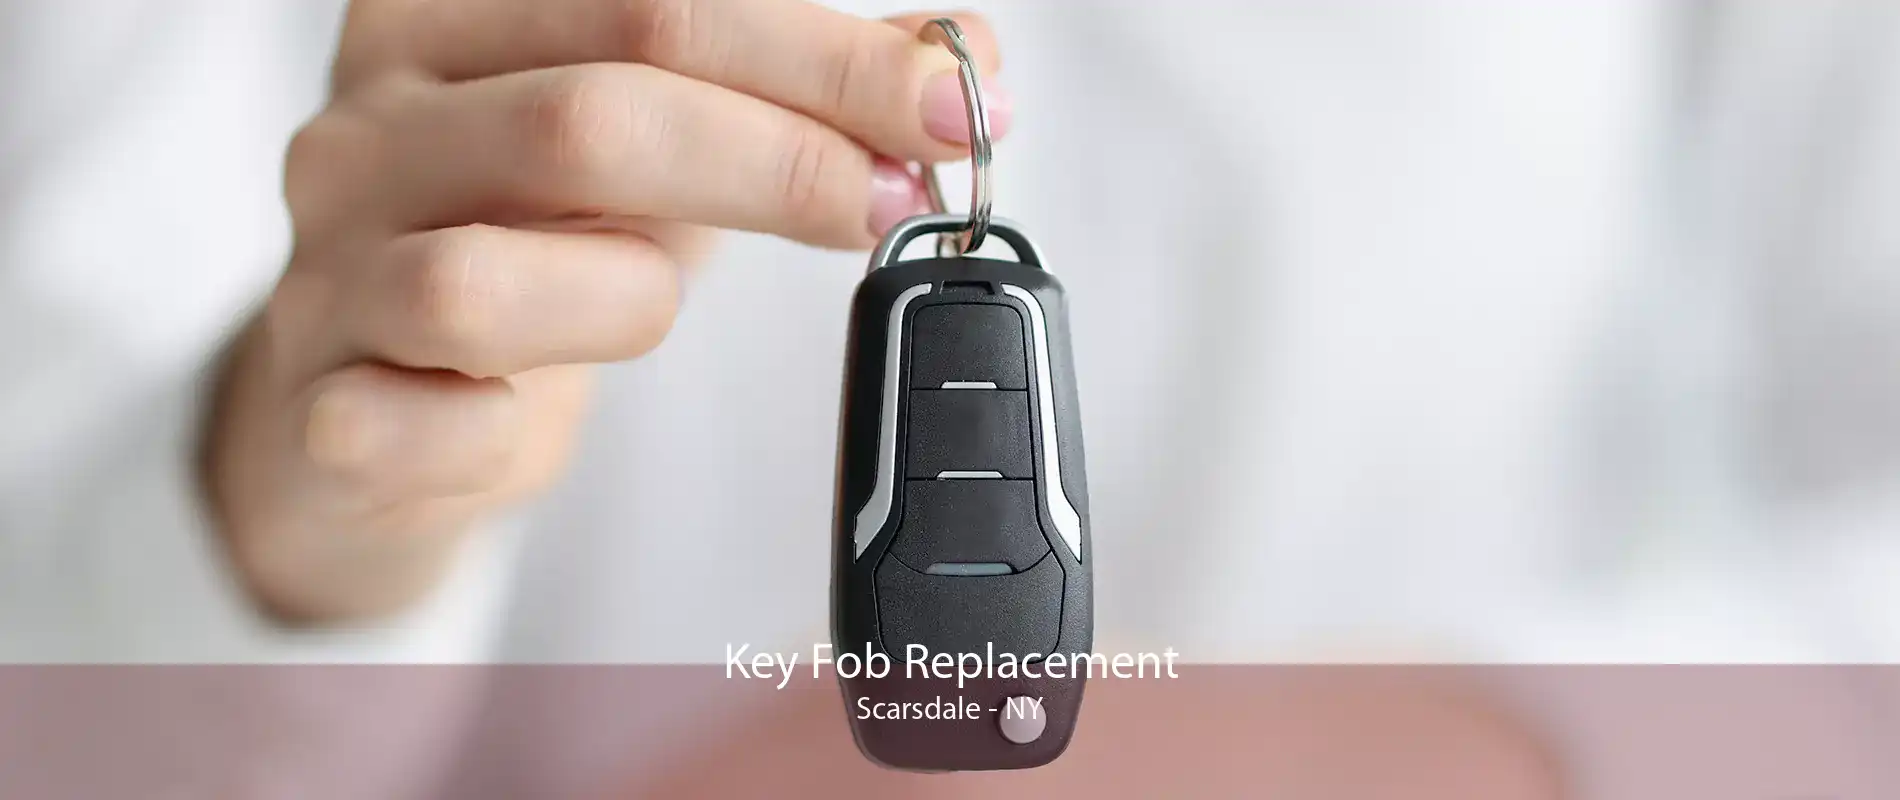 Key Fob Replacement Scarsdale - NY